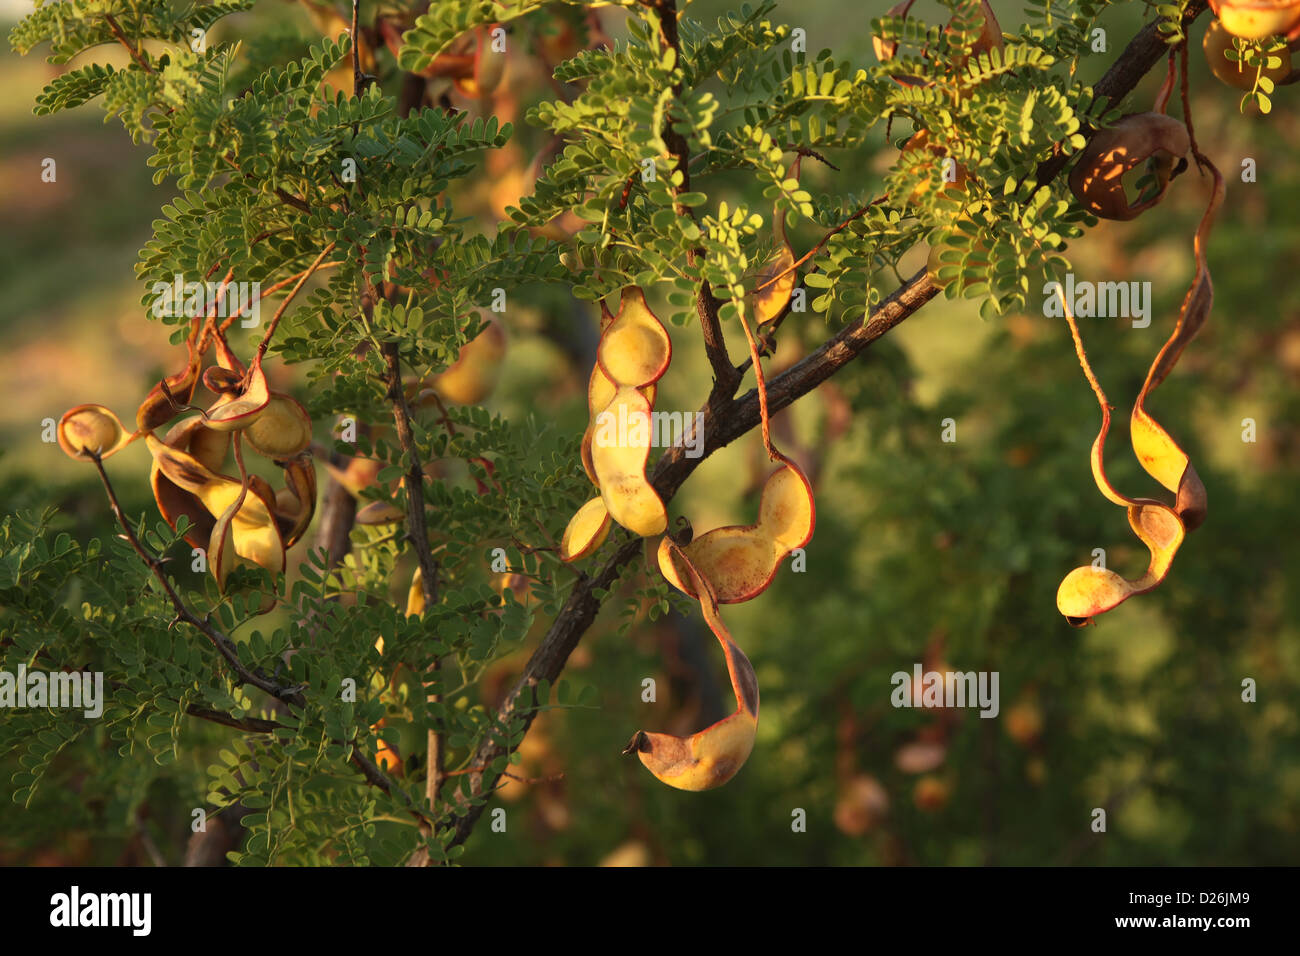 Mesquite seed pods in tree Stock Photo